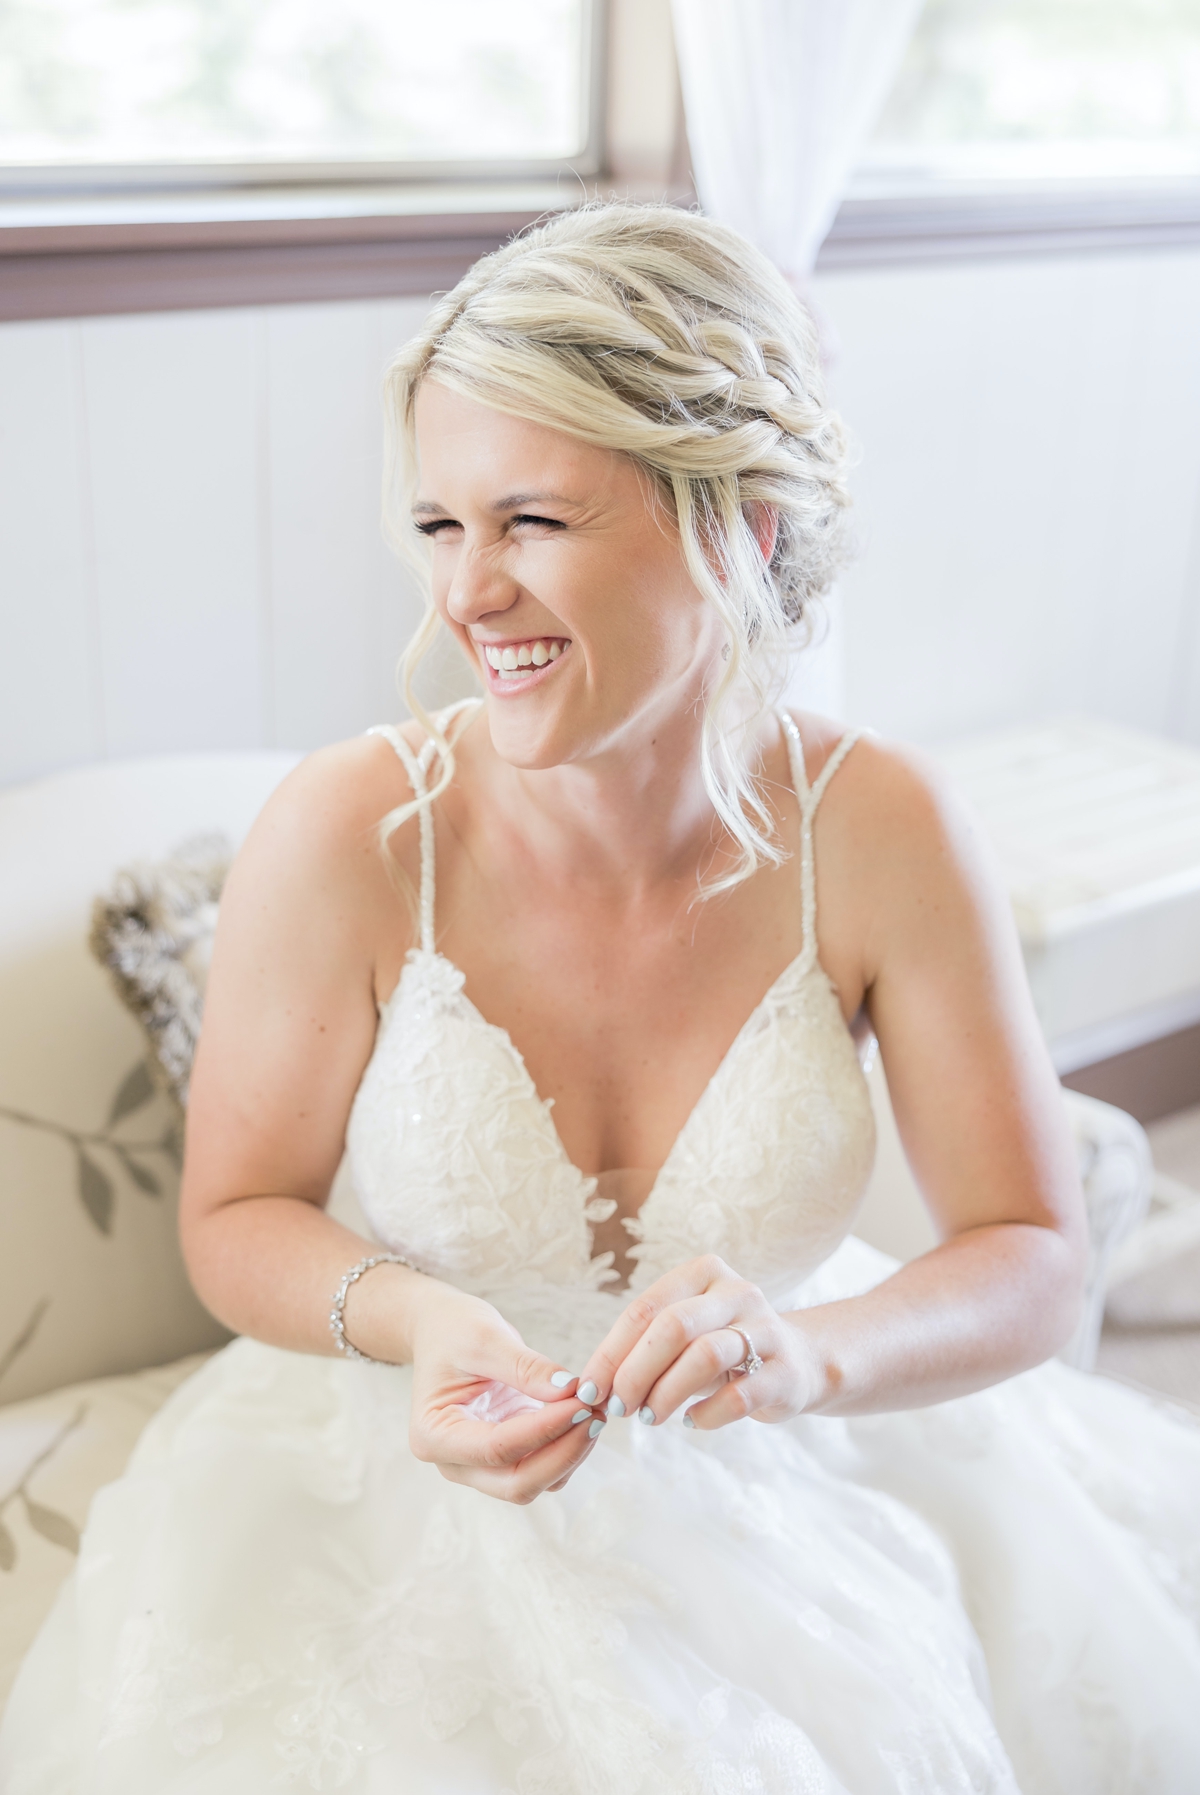 Grace laughing off in the distance with her eyes crinkling as she holds her earring in her hand on her wedding day at Walters Barn.